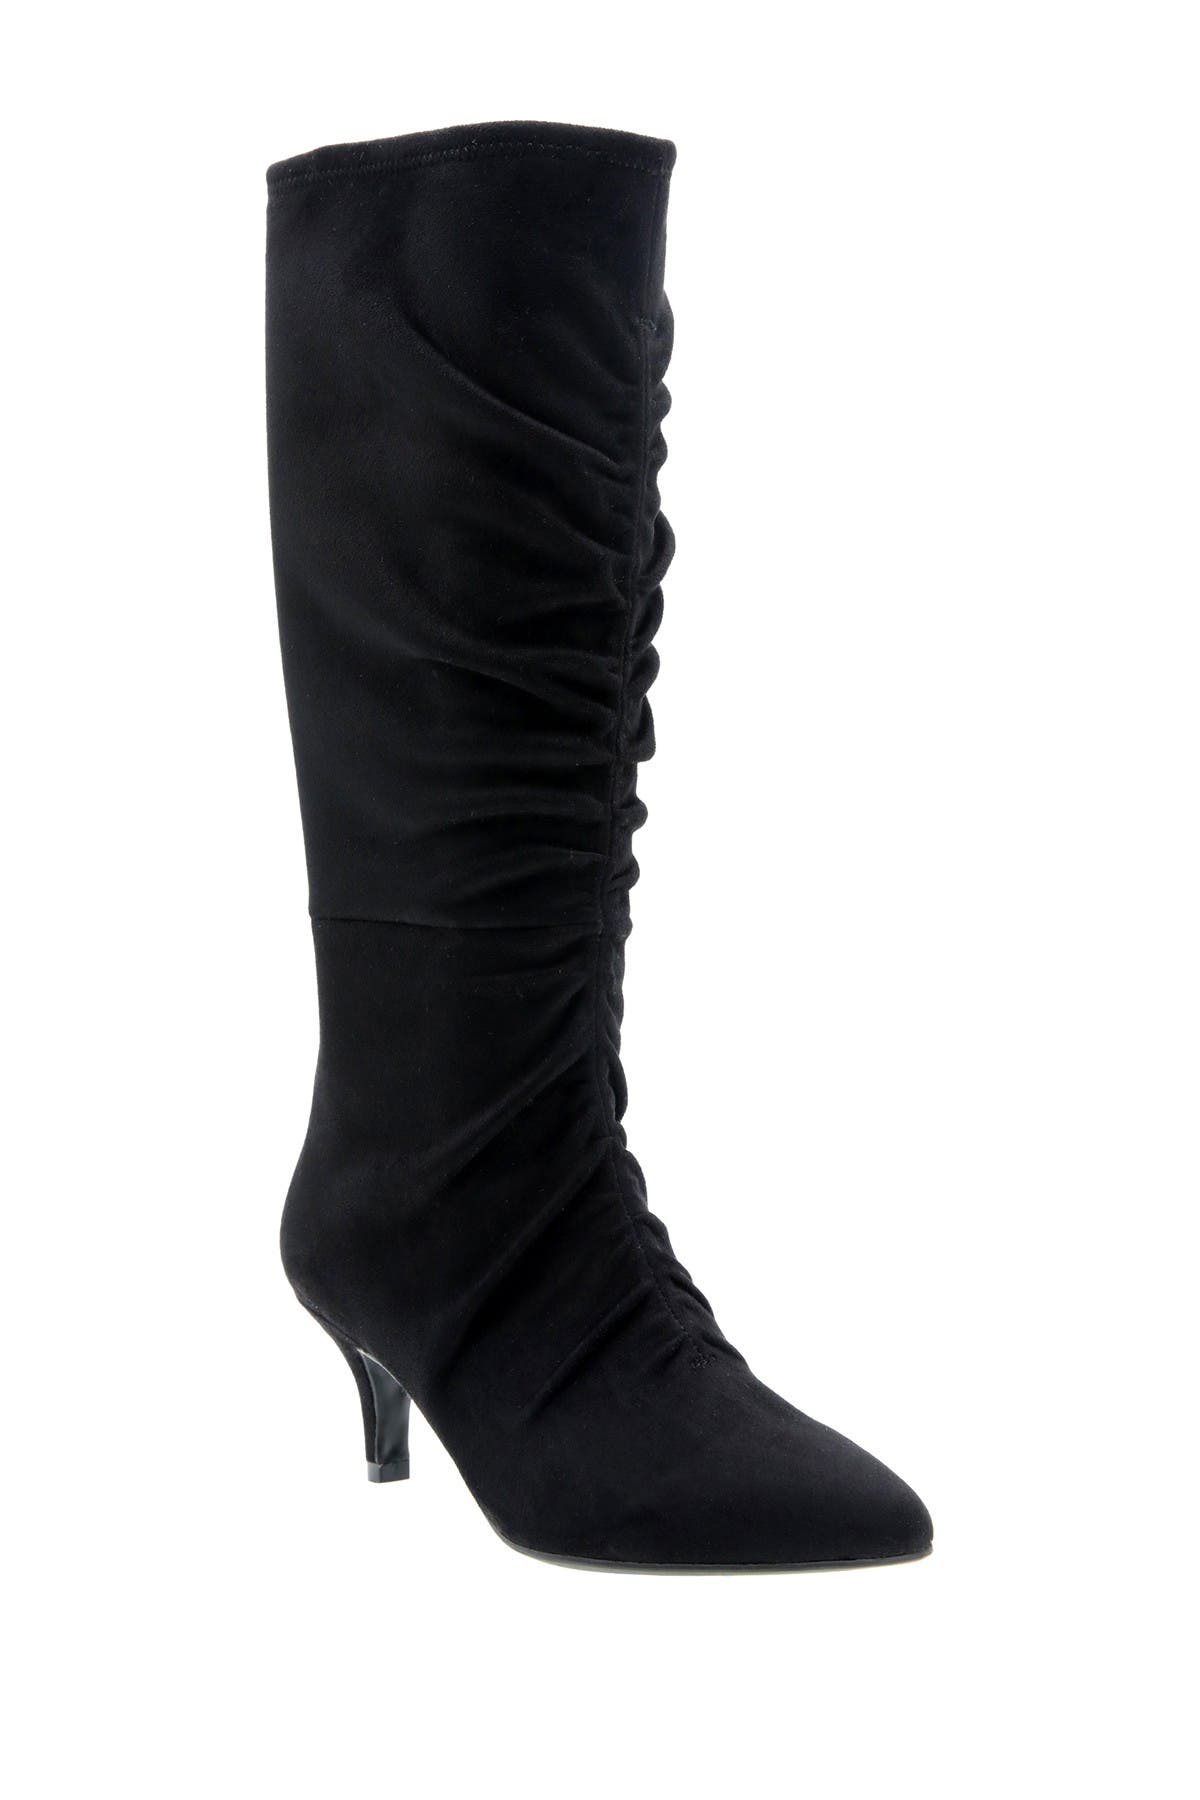 impo womens boots